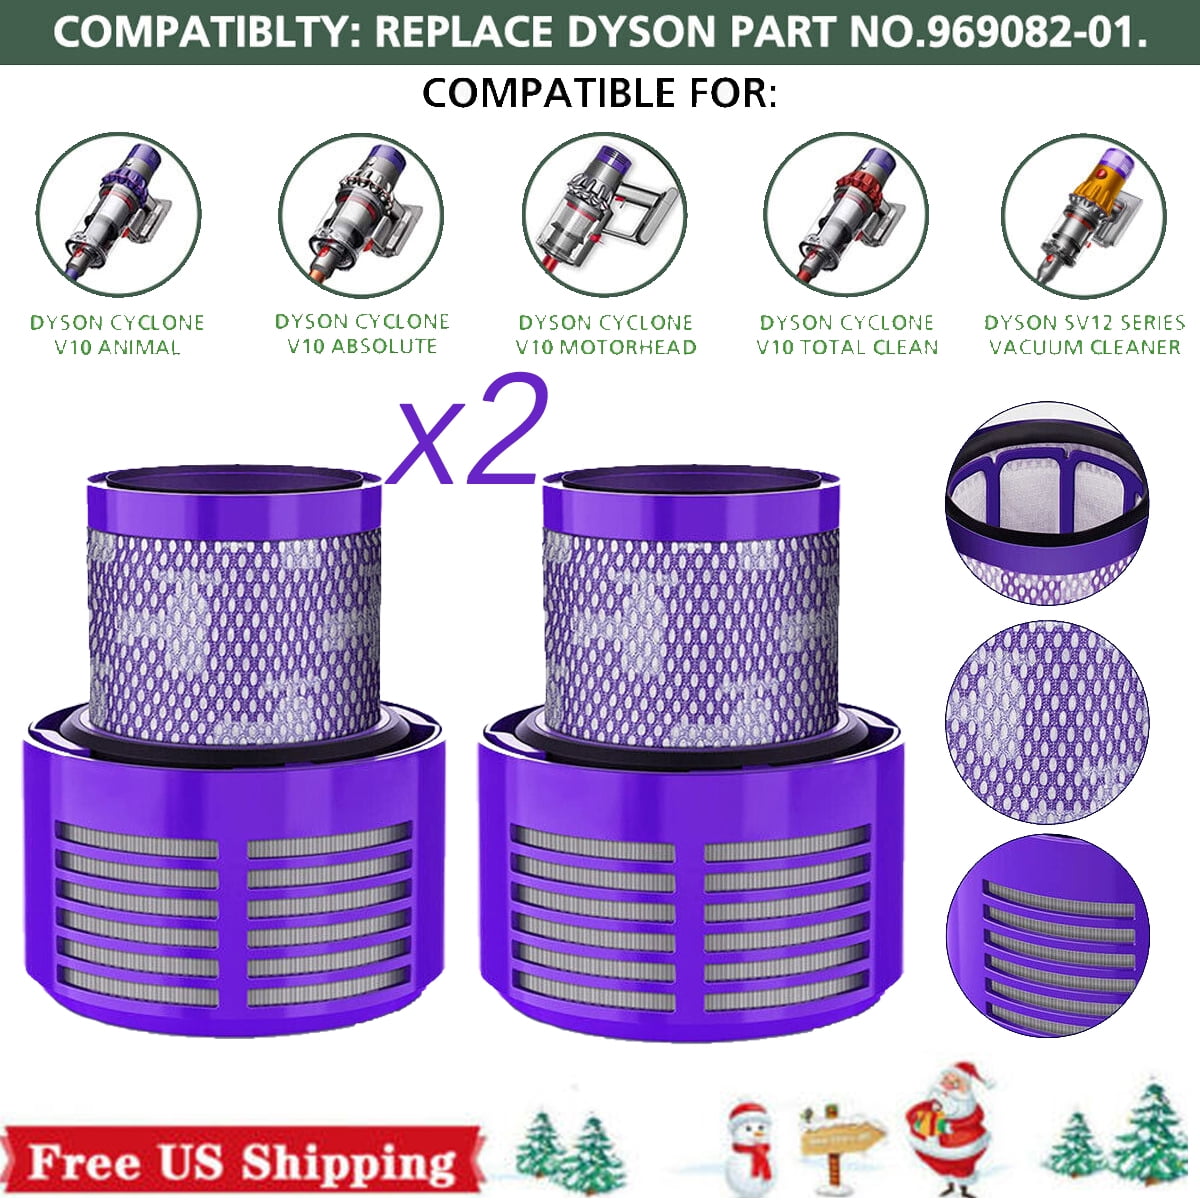 2-Pack HEPA Replacement V10 Filter for Dyson V10 SV12 Part No. 969082-01